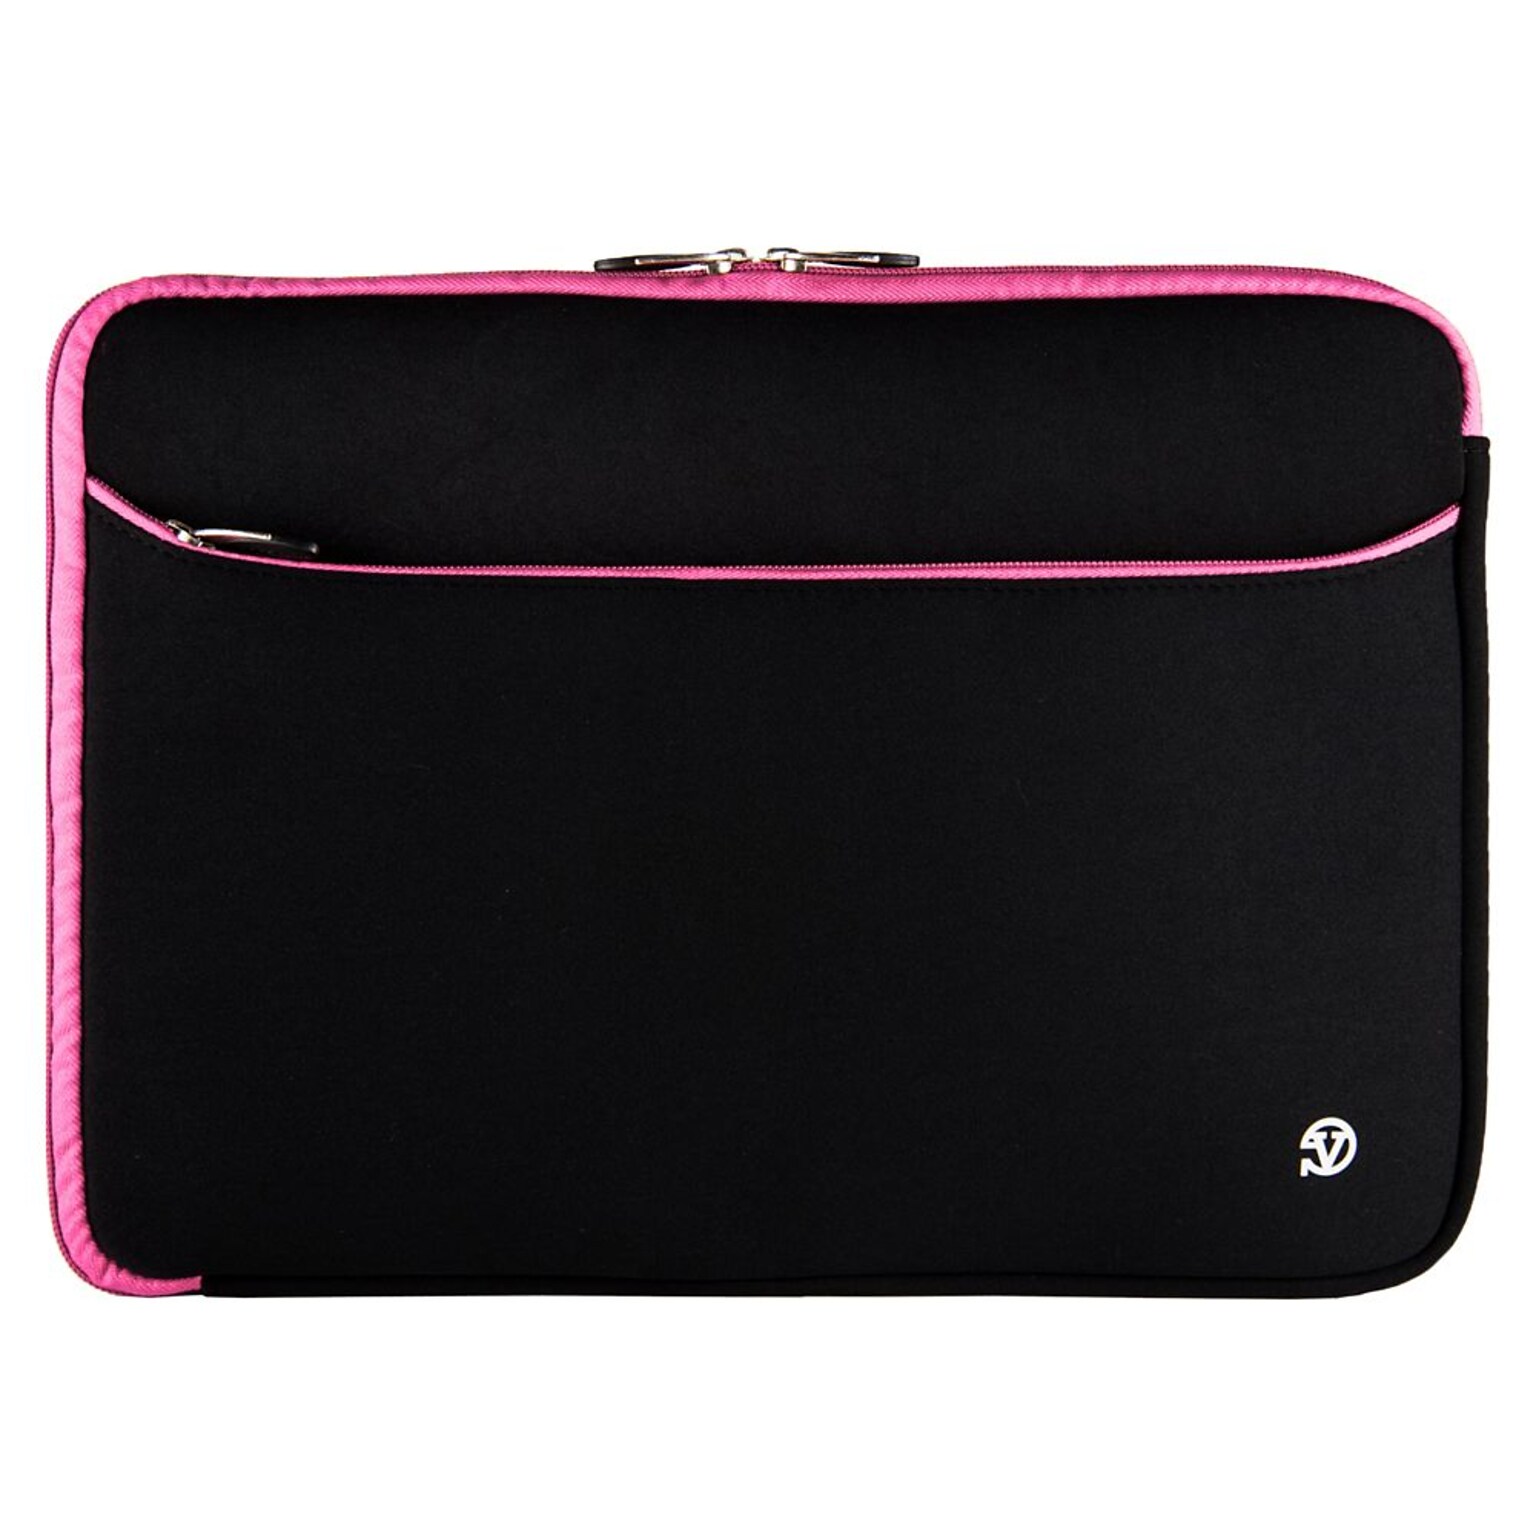 Vangoddy Neoprene Laptop Carrying Sleeve Fits up to 14 Laptops (Black with Pink Trim)